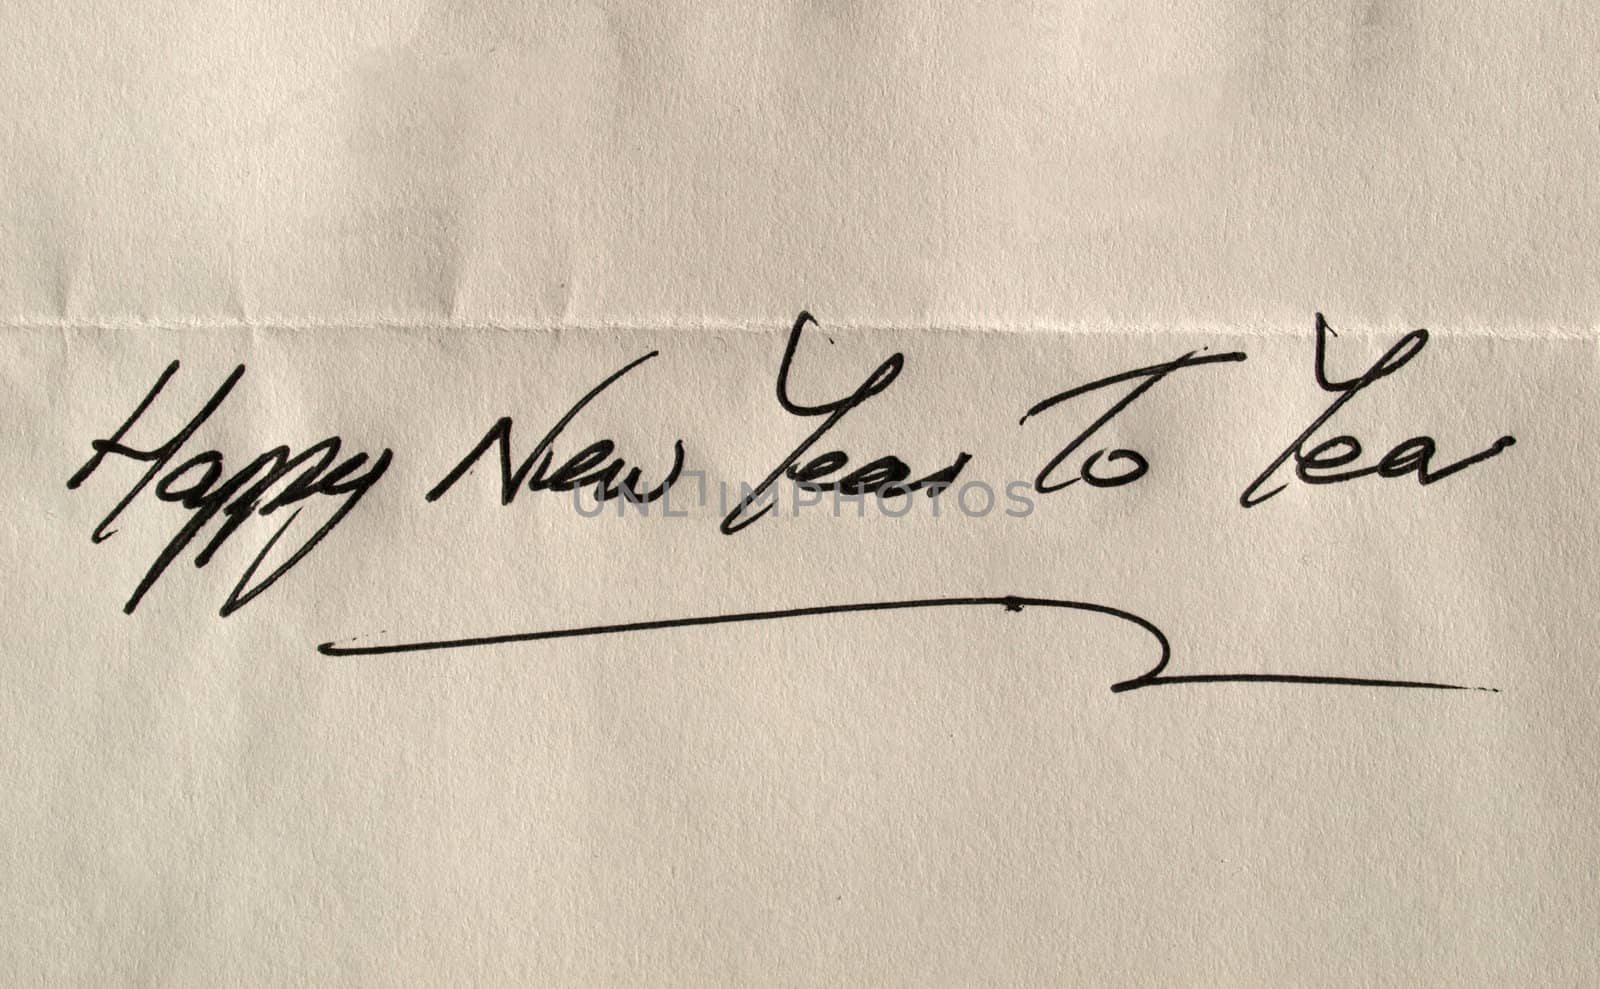 Happy new year to you handwritten in elegant English characters